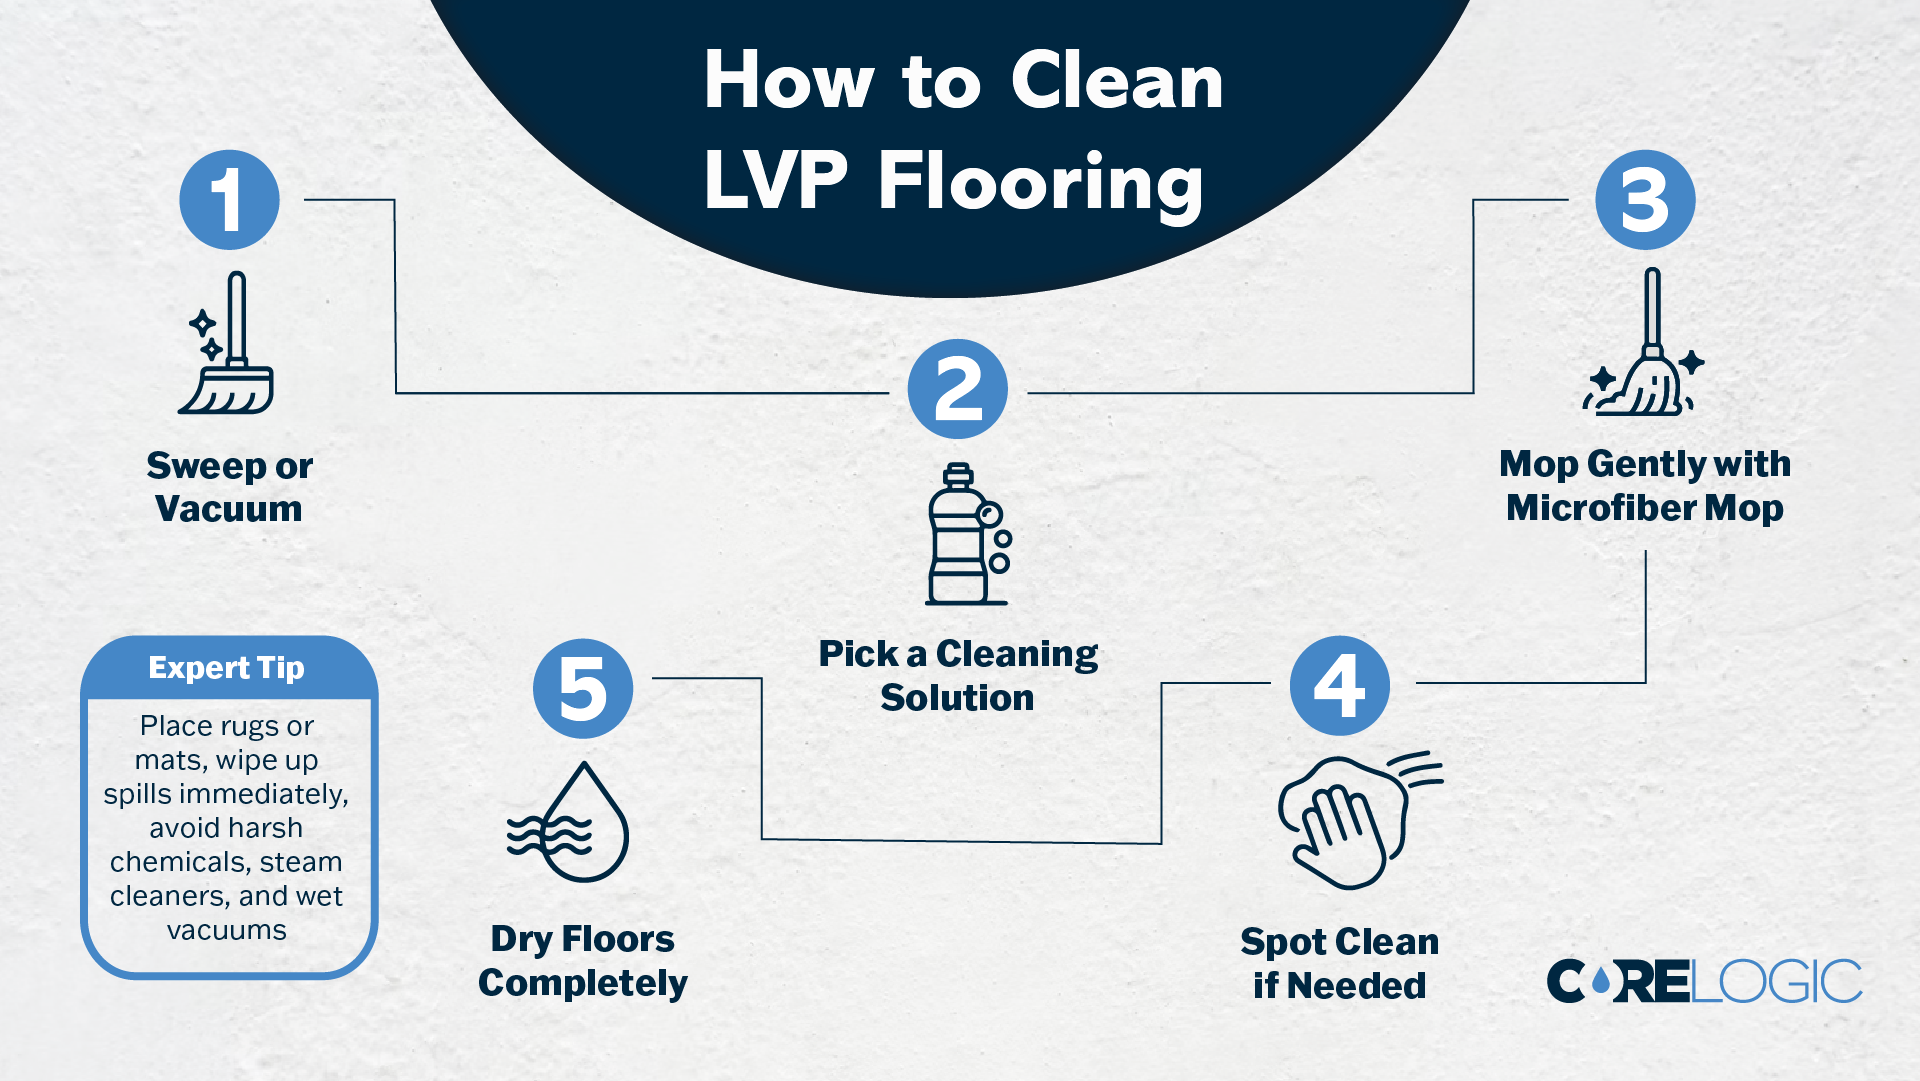 How to Clean Luxury Vinyl Plank Flooring - LVP Pro Cleaning Tips